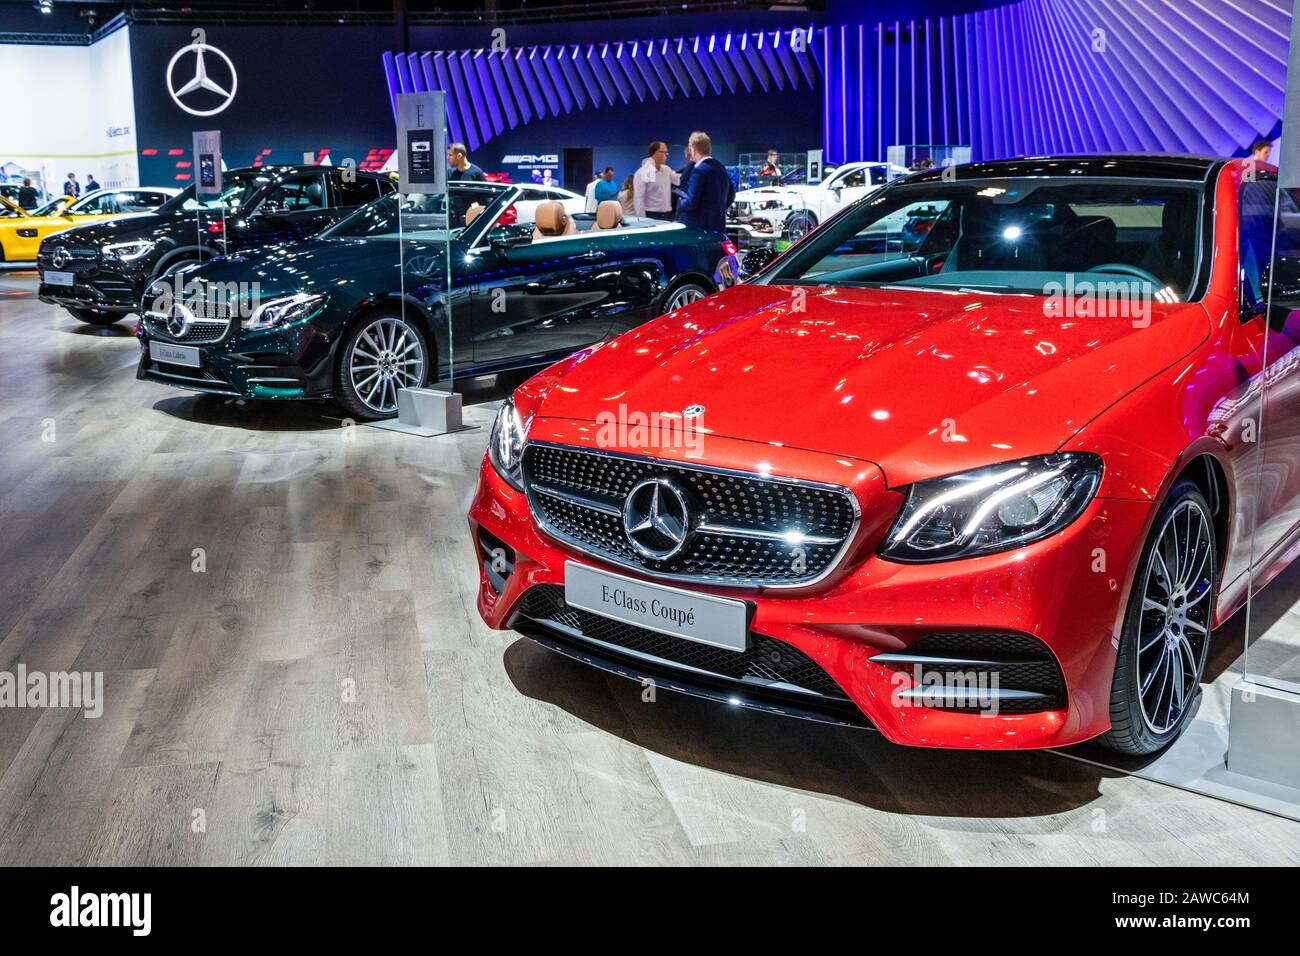 BRUSSELS - JAN 9, 2020: New Mercedes car models on display at the Brussels Autosalon 2020 Motor Show. Stock Photo